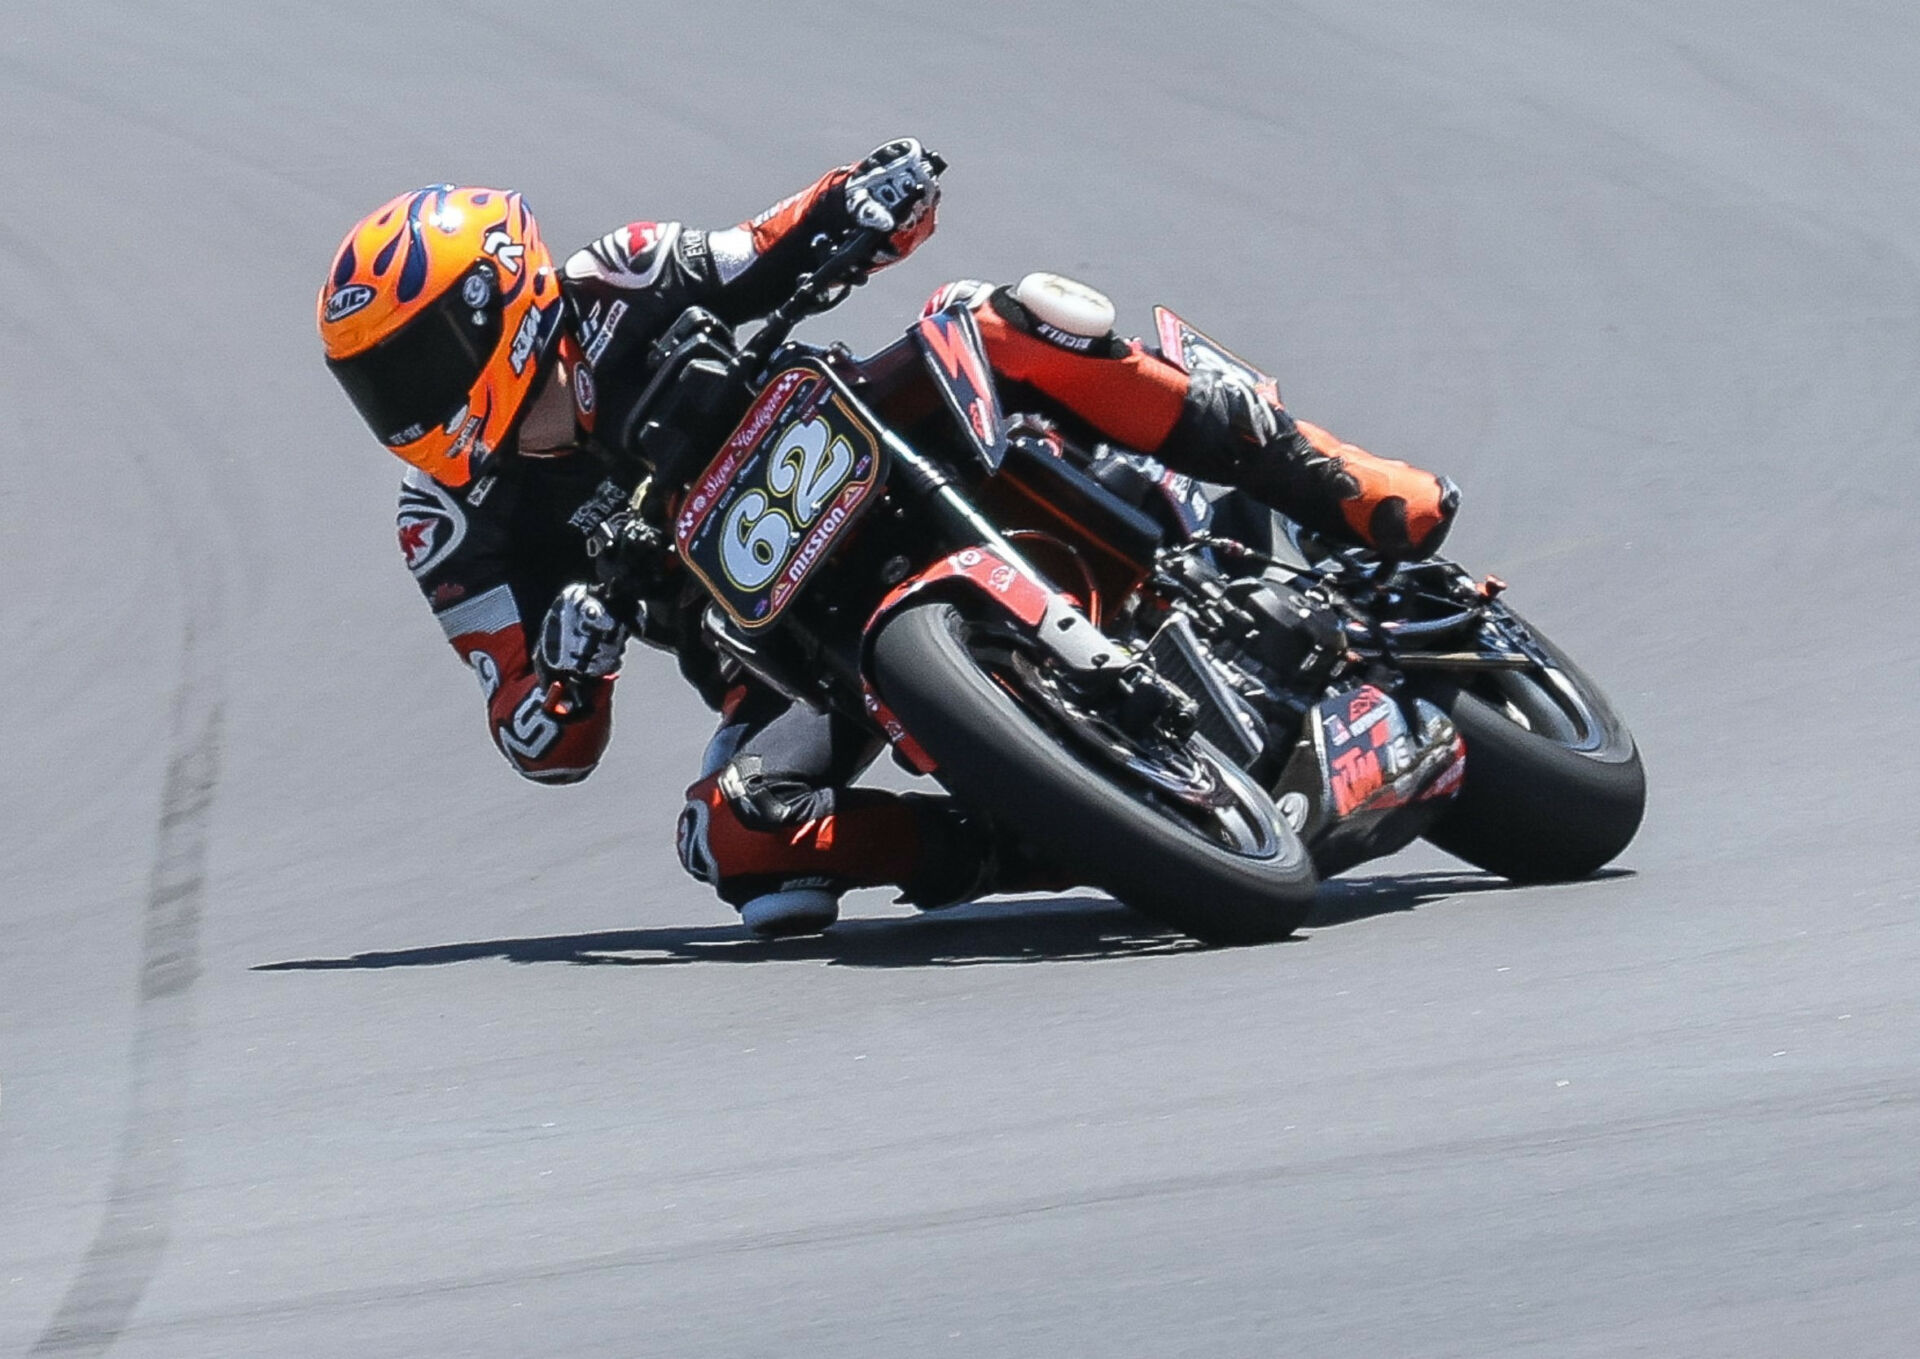 Andy DiBrino (62) in action during the 2023 MotoAmerica Super Hooligan season. Photo by Brian J. Nelson.